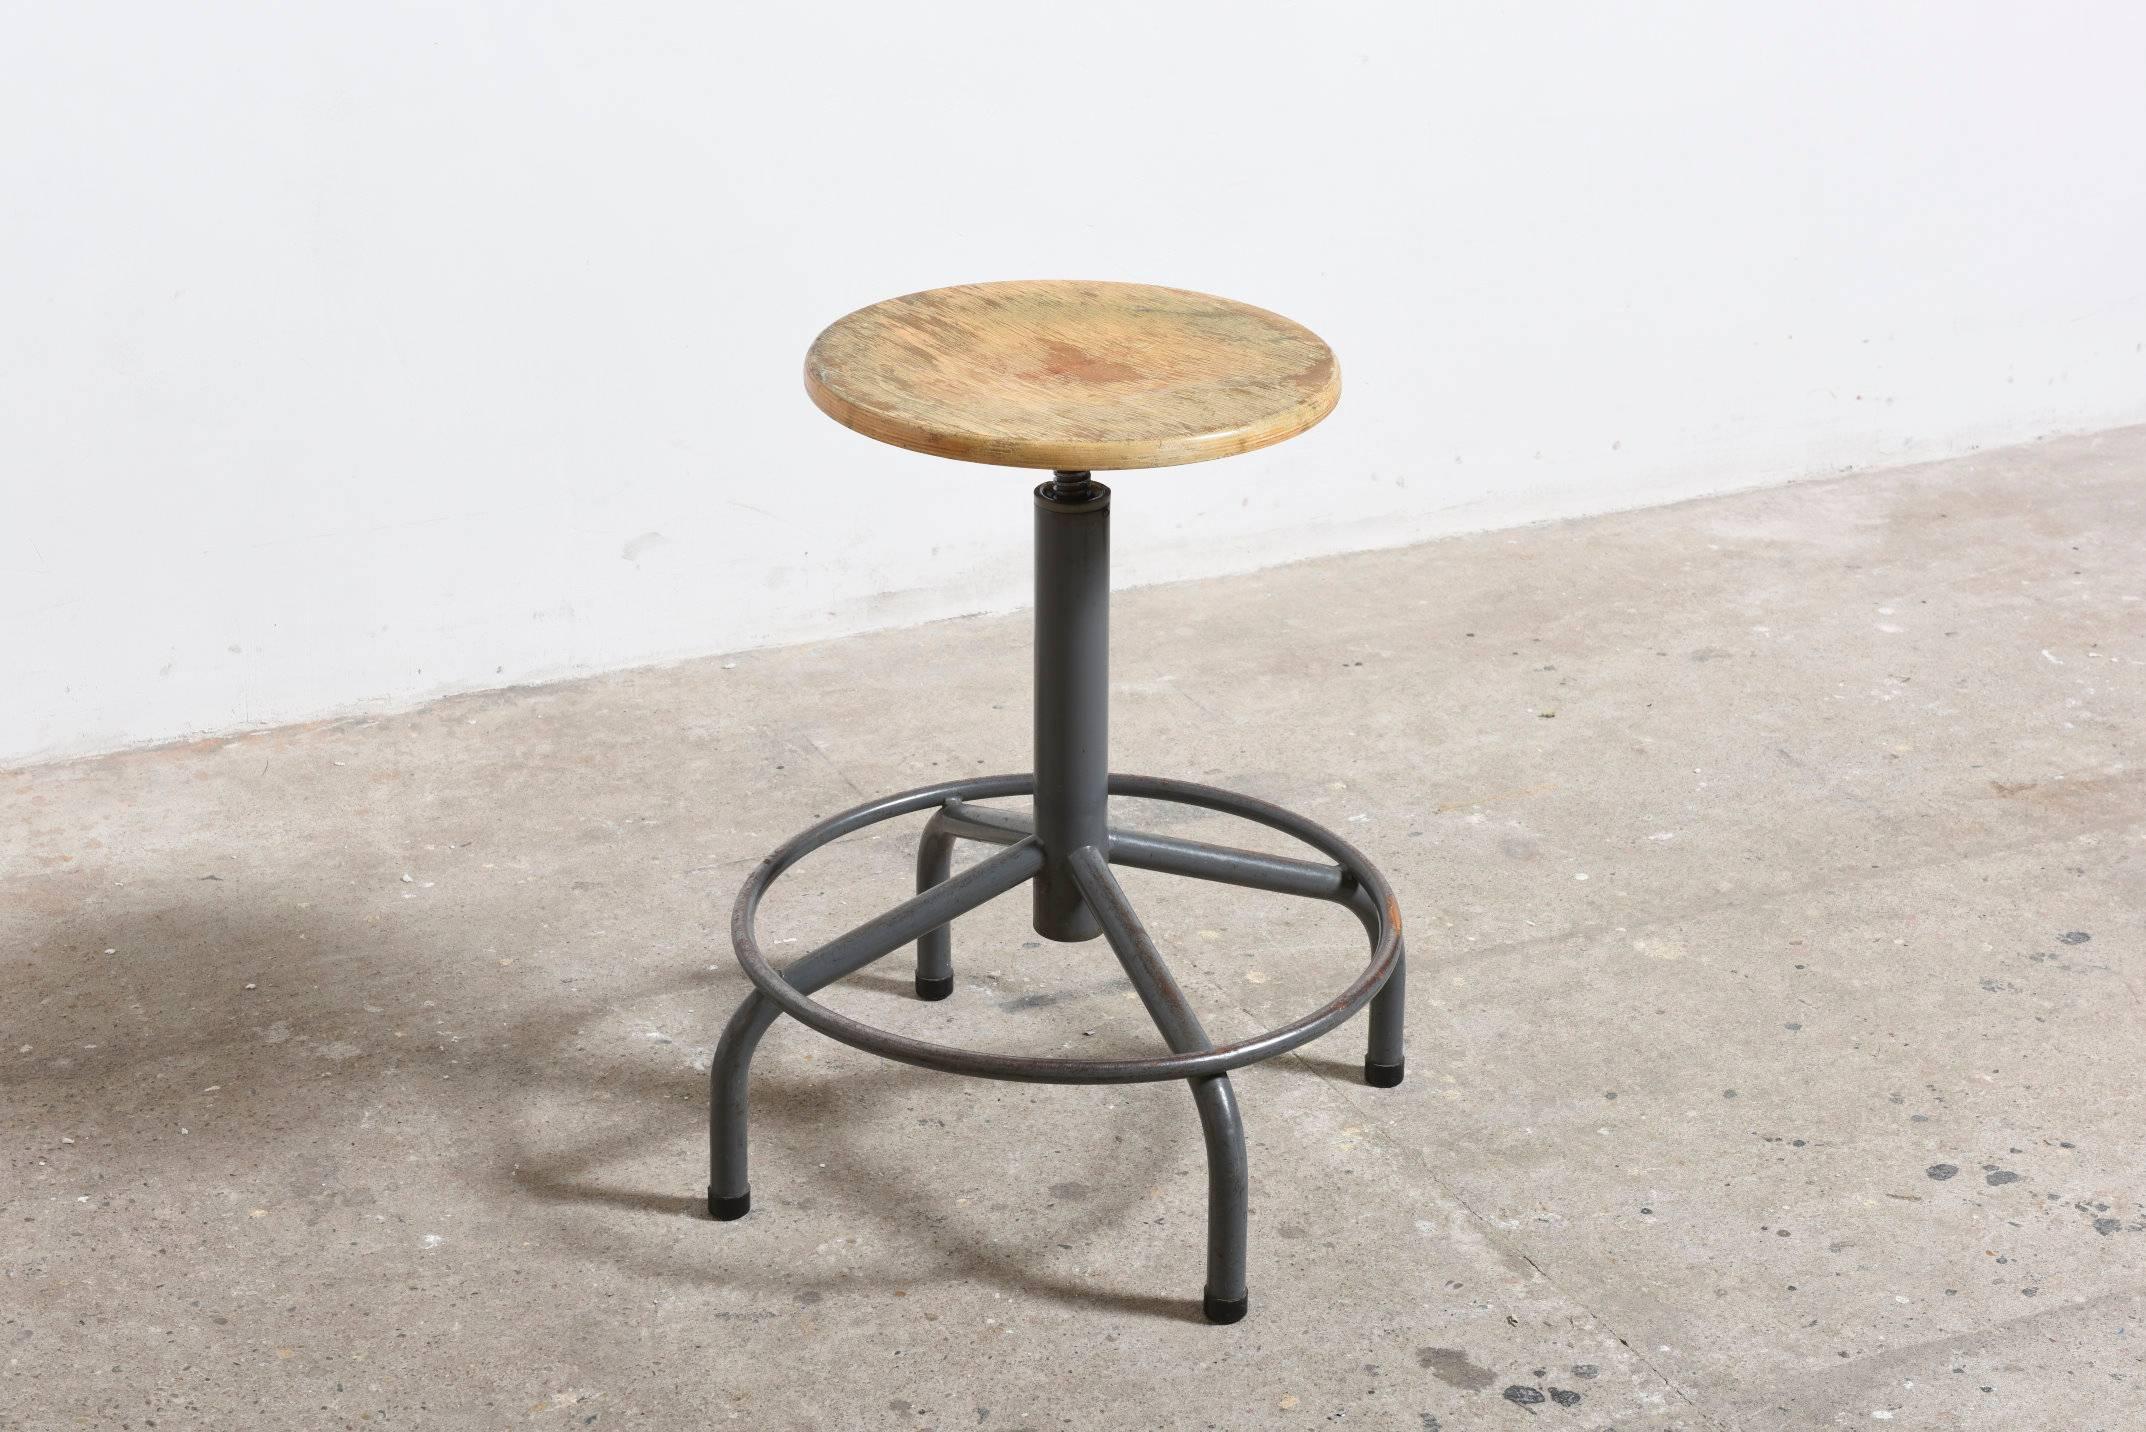 Beautiful rare set of six enameled metal tube and beech seat drafting stools. Adjustable height, foot rests and pedestal base with wide spread feet.
All good original condition with visible signs of wear and enamel loss. 

Just very beautiful in